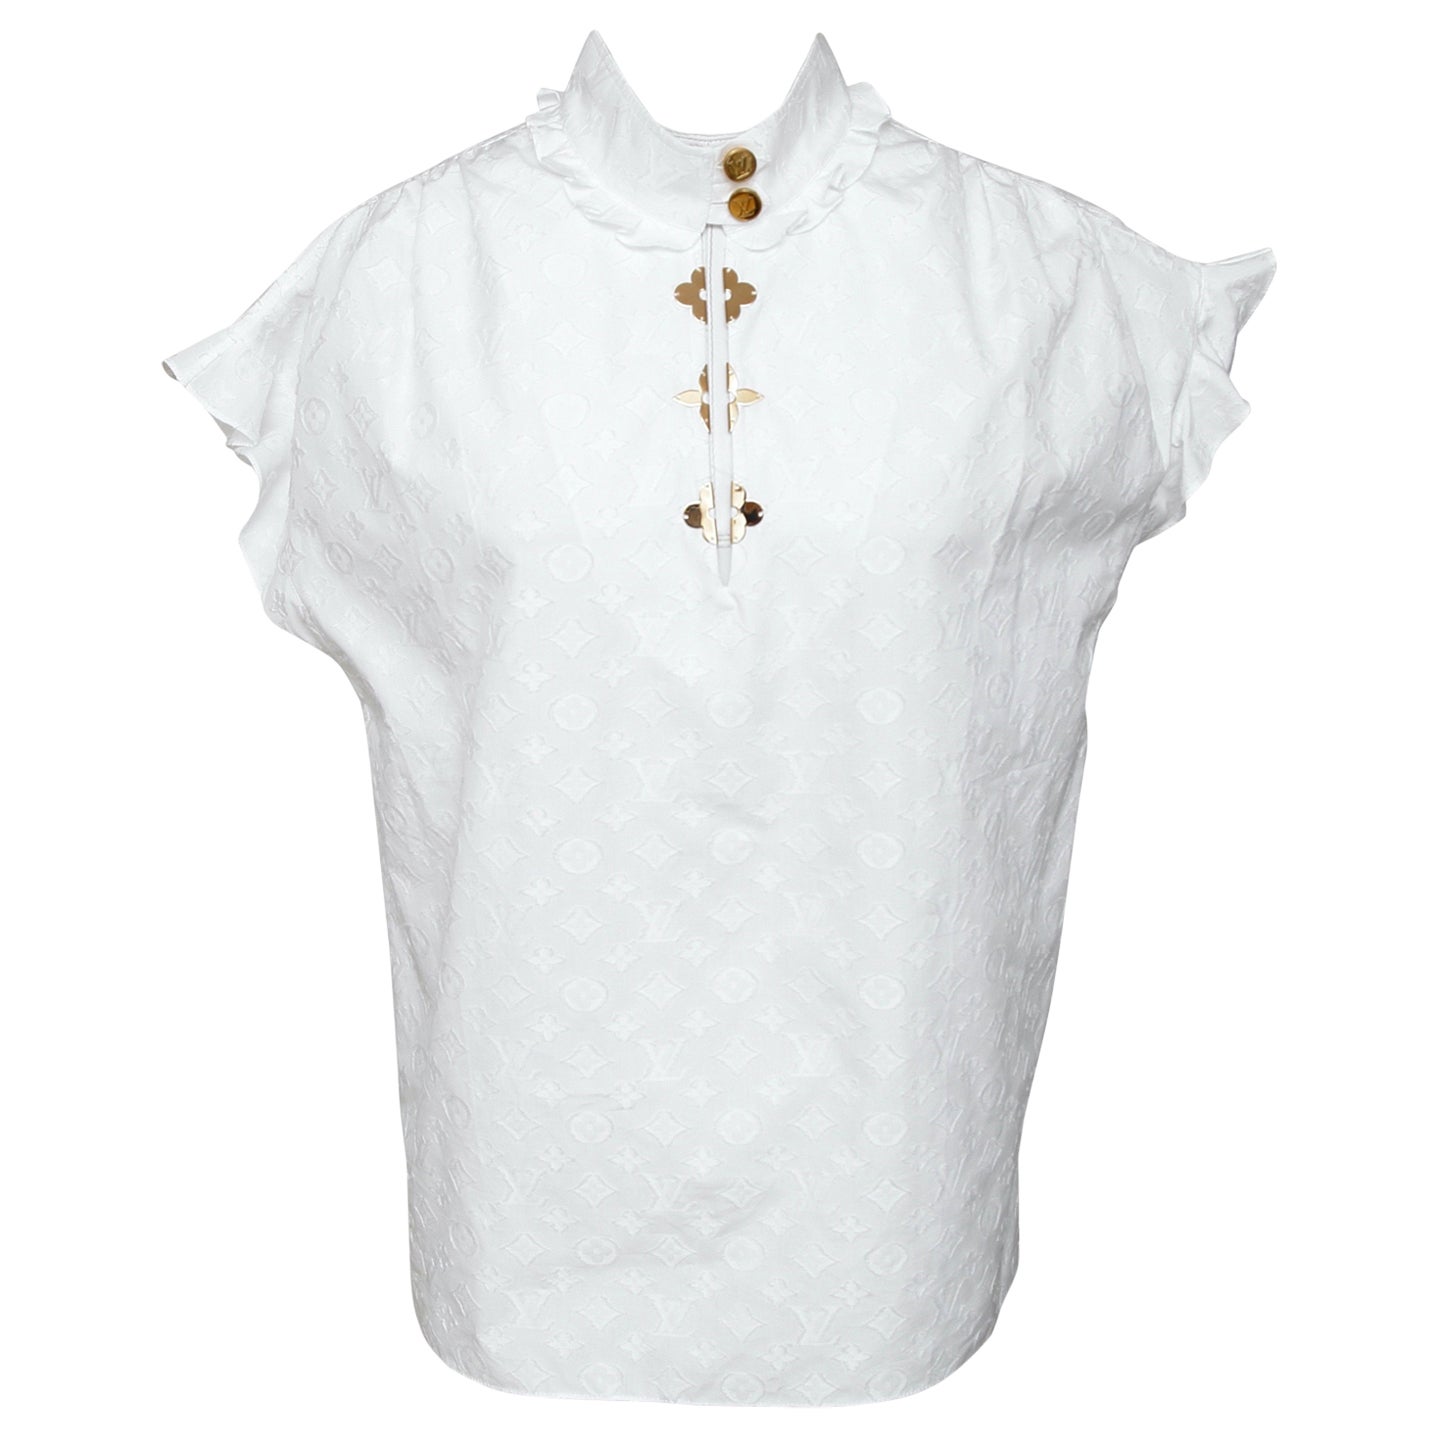 Louis Vuitton Lvse Placed Embroidery Short-sleeved Shirt White. Size 3L